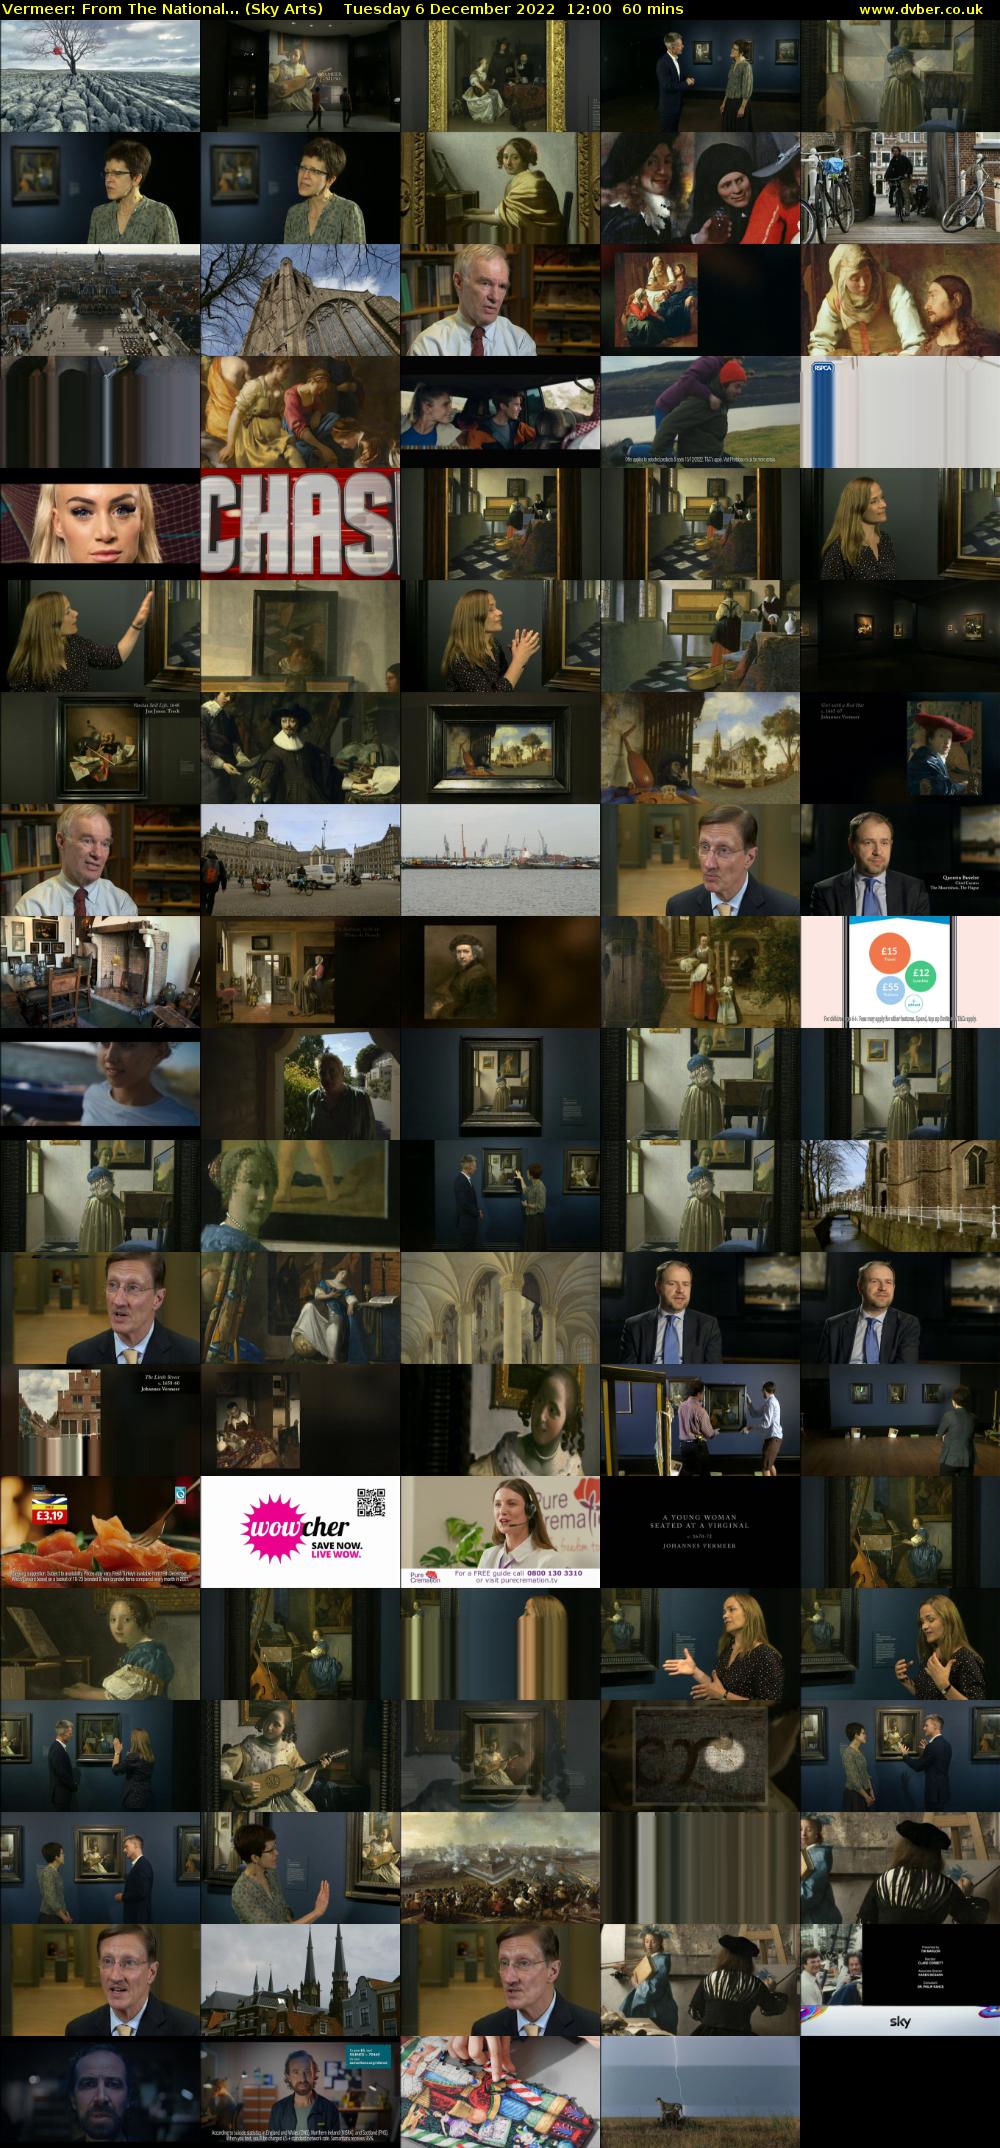 Vermeer: From The National... (Sky Arts) Tuesday 6 December 2022 12:00 - 13:00